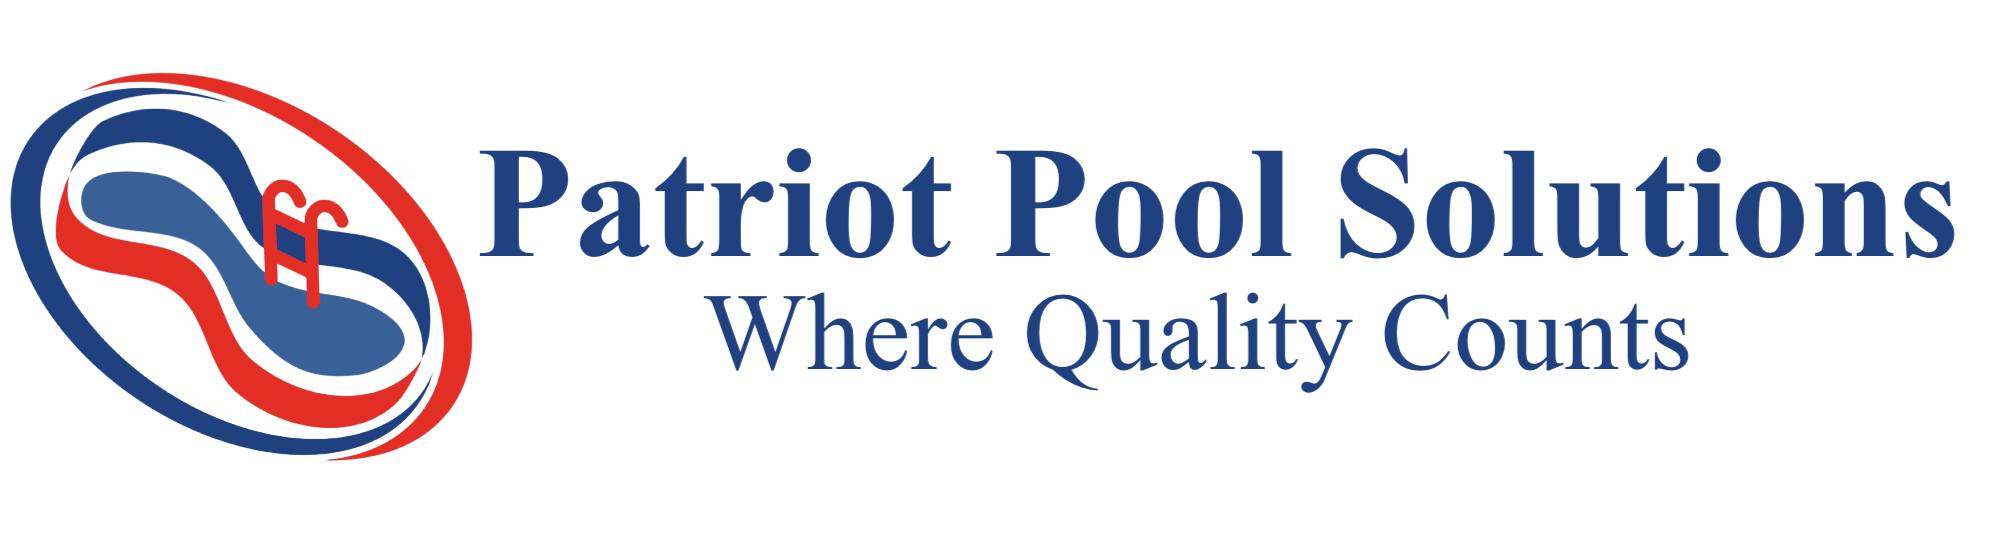 Patriot Pool Solutions Pool Cleaning Service FL